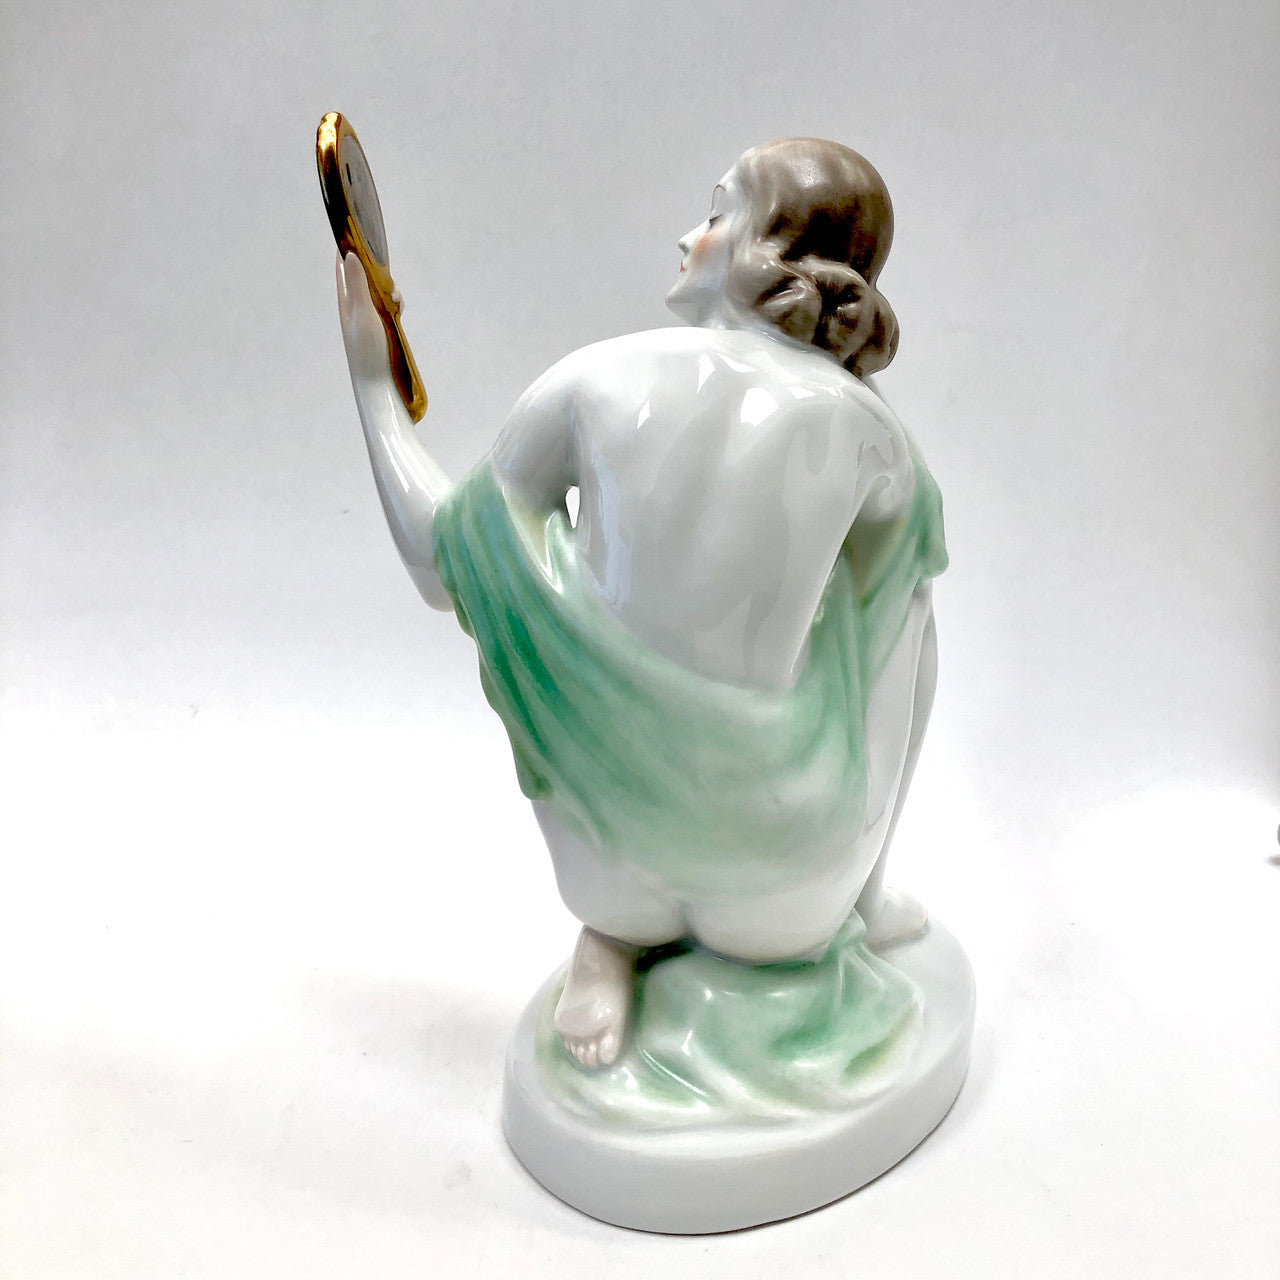 Herend, 5724, Figurine, Female, Nude, with Hand Mirror, Hungary, Porcelain, Vintage, Mid-Century,